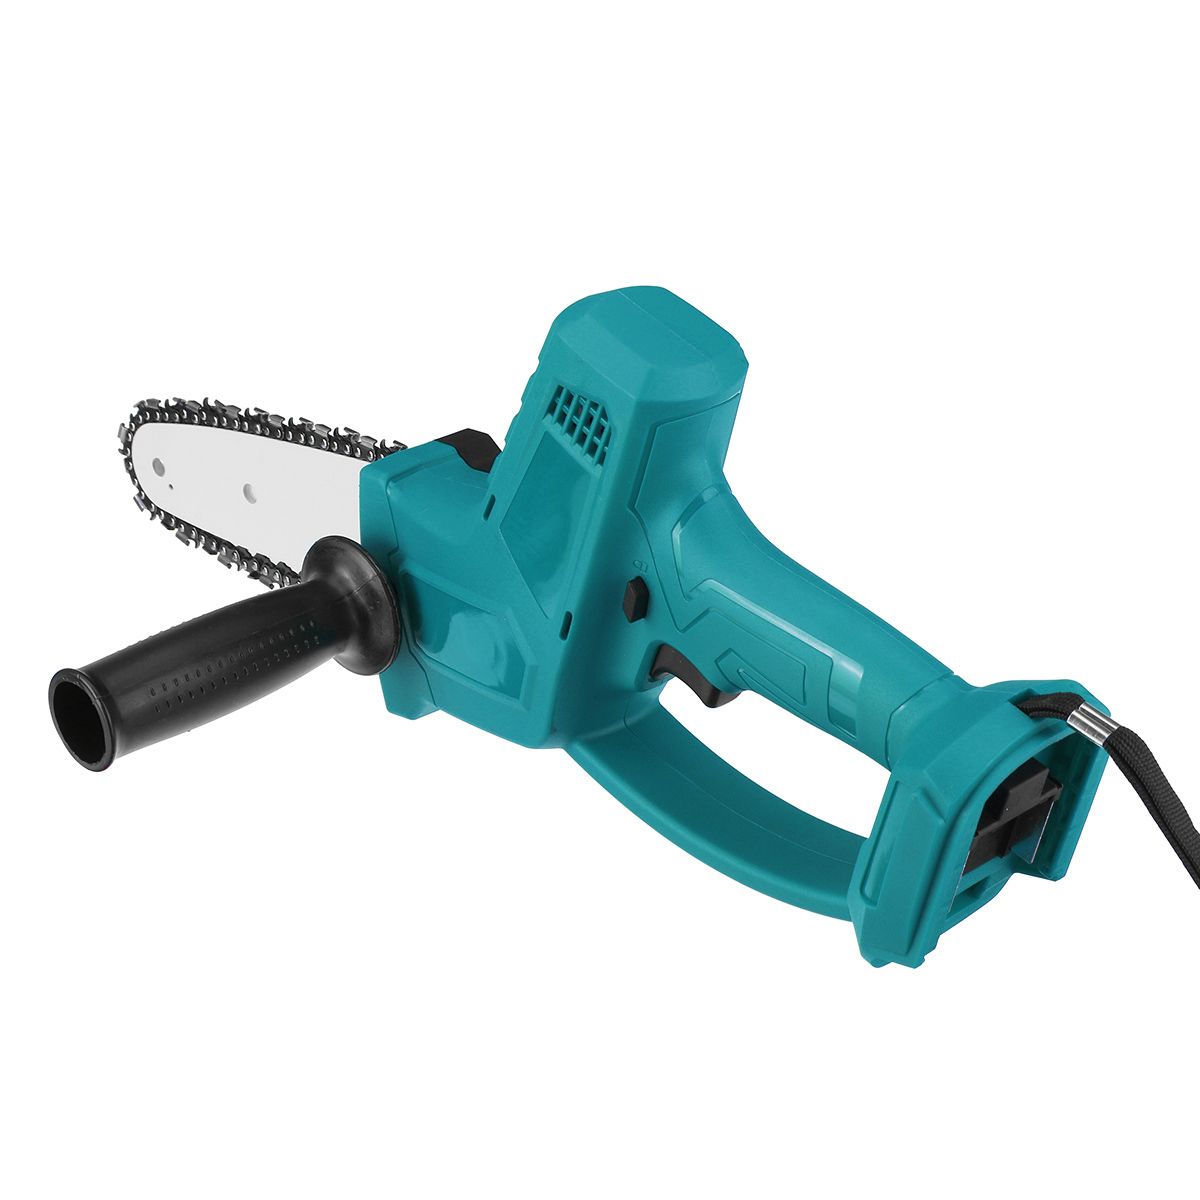 1200W-Portable-Electric-One-Hand-Saw-Woodworking-Chain-Saw-Wood-Cutting-Machine-For-Makita-18V-Batte-1765734